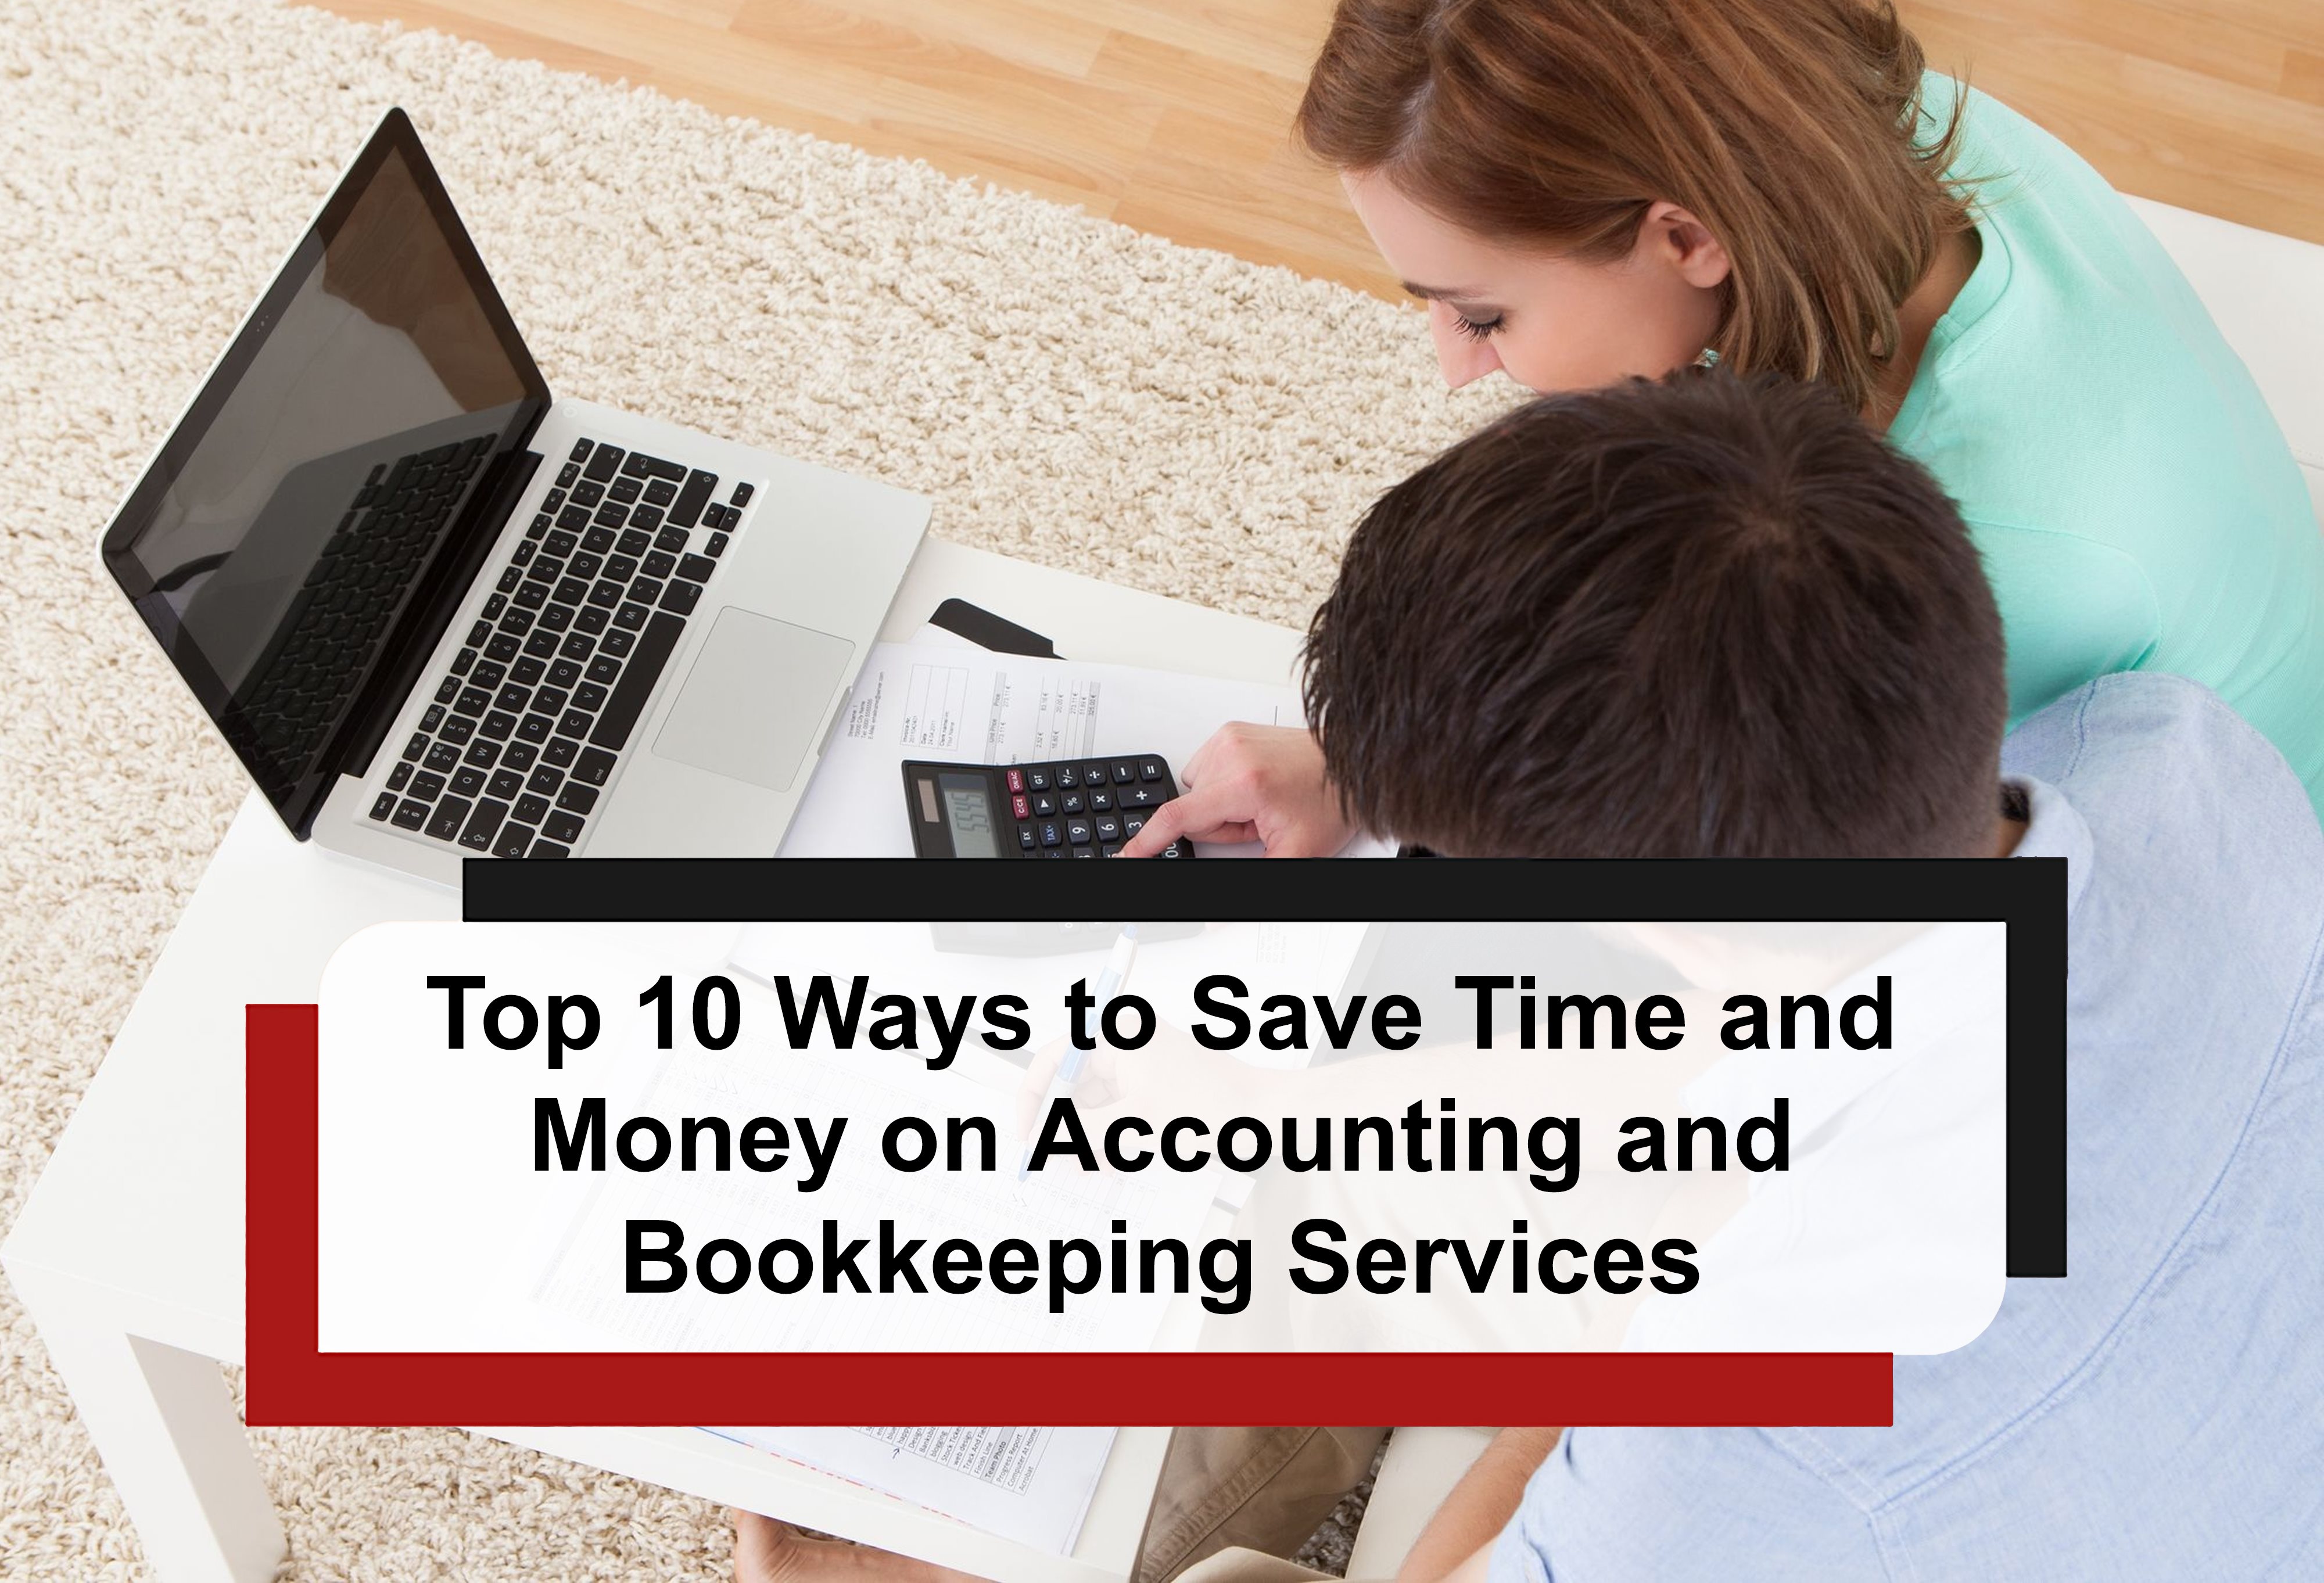 You are currently viewing Top 10 Ways to Save Time and Money on Accounting and Bookkeeping Services to Simplify Accounting Service in Scarborough